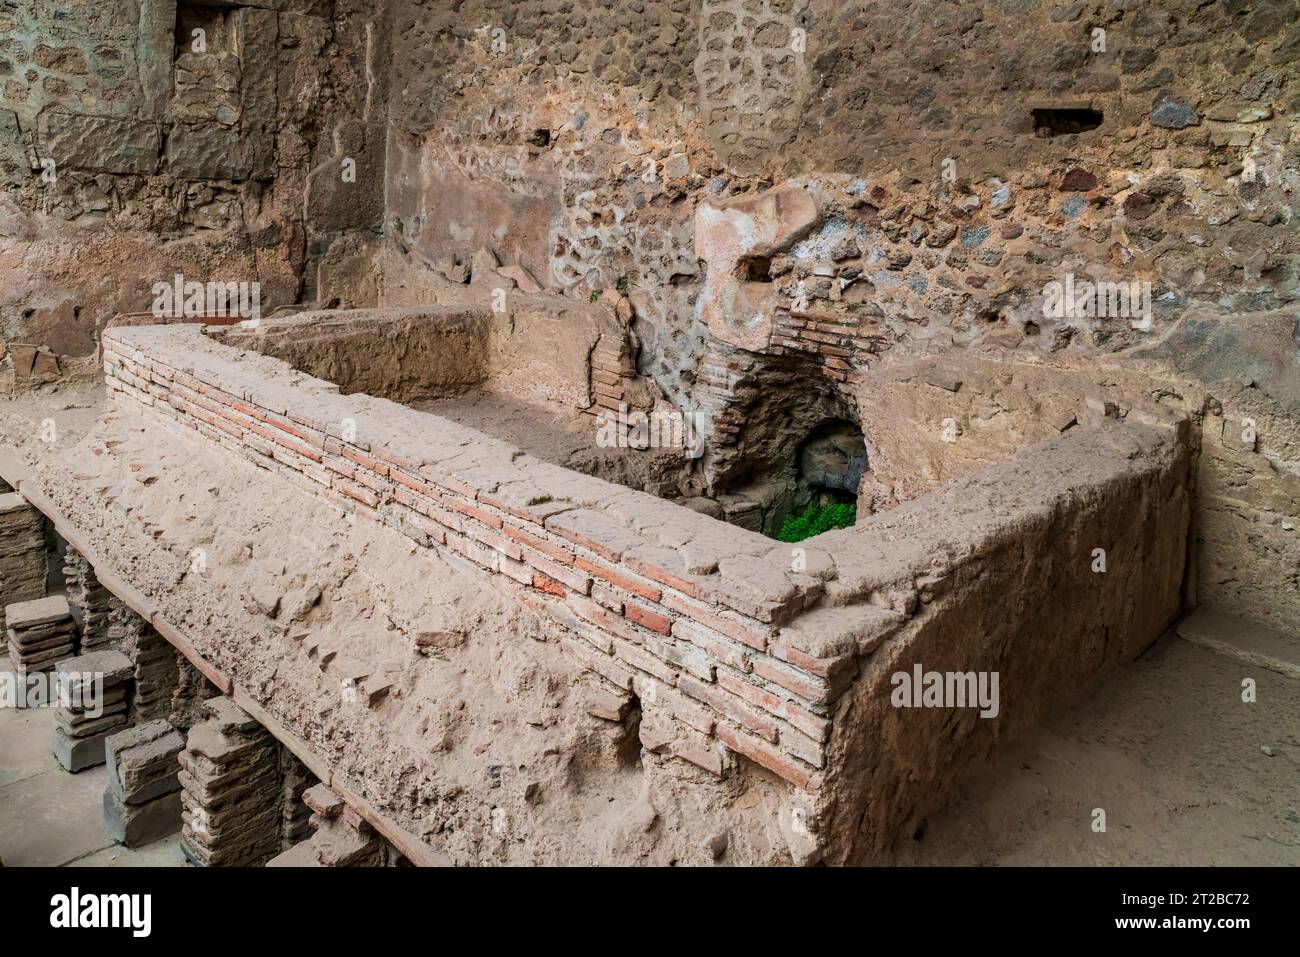 POMPEI, ITALY - SEPTEMBER 20 2023: Ruins of Pompei, an ancient city which was buried by the 79 AD eruption of Mount Vesuvius. Stock Photo